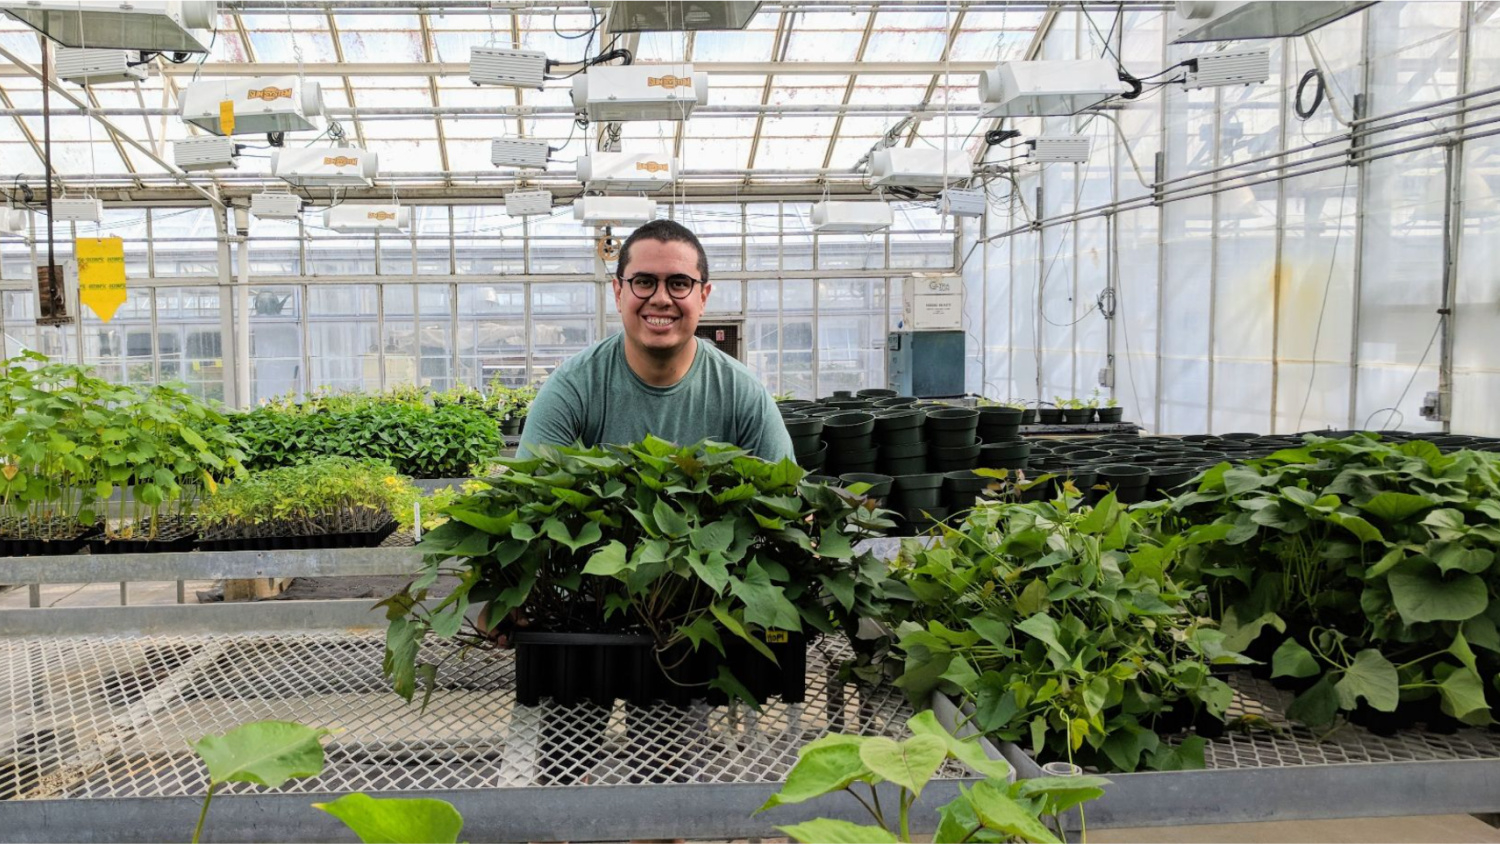 Graduate student in greenhouse with plants.